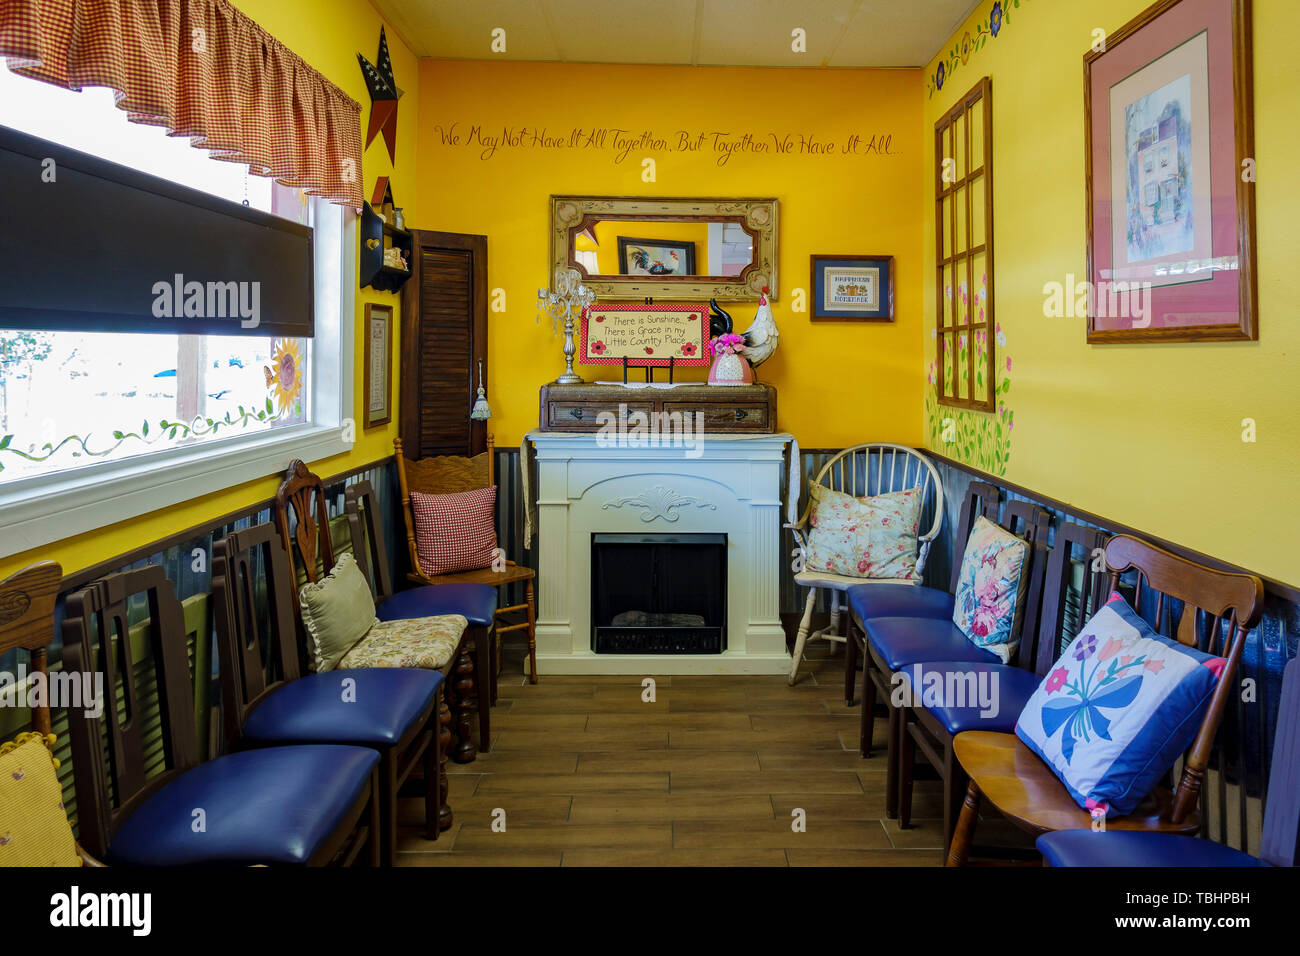 Henderson, APR 27: Interior view of waiting area of an old restaurant on APR 27, 2019 at Henderson, Nevada Stock Photo